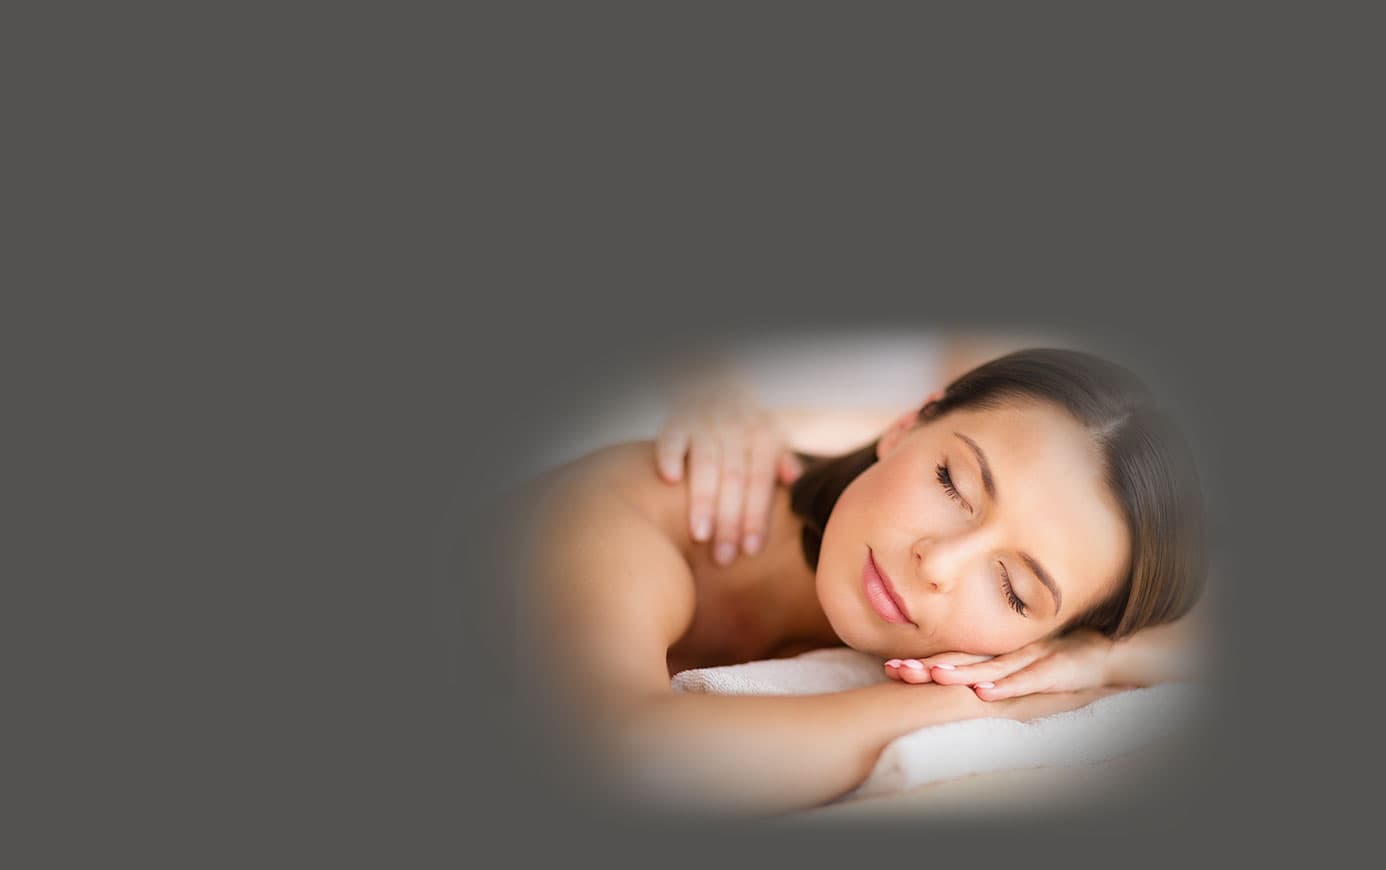 With techniques like sports, prenatal, myofascial, and partners massage, massage therapy can help you to feel better in Rancho Cucamonga California.